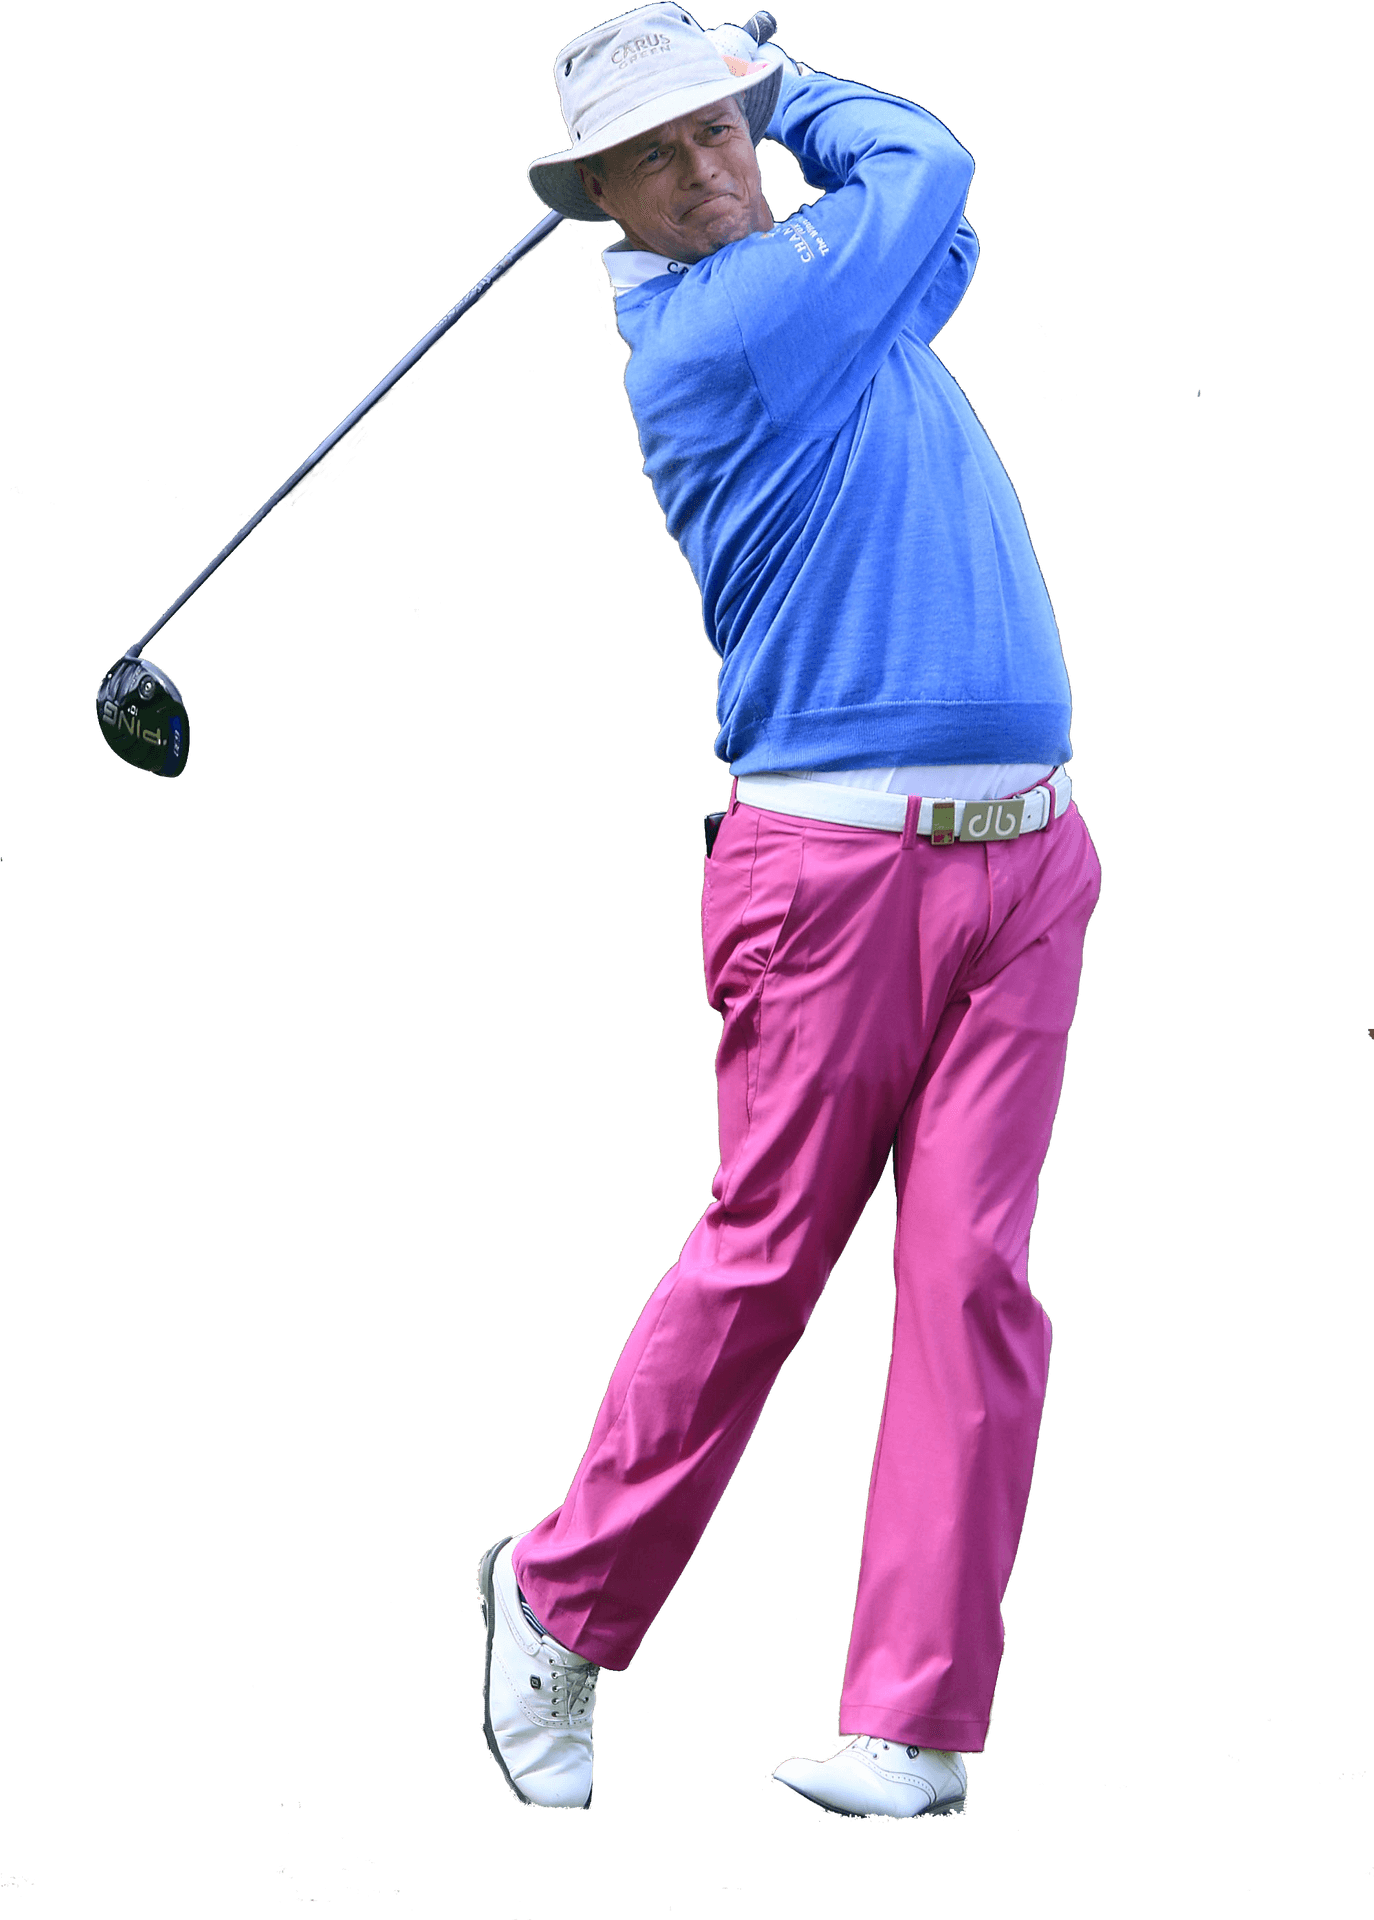 Golfer Mid Swing Action PNG image